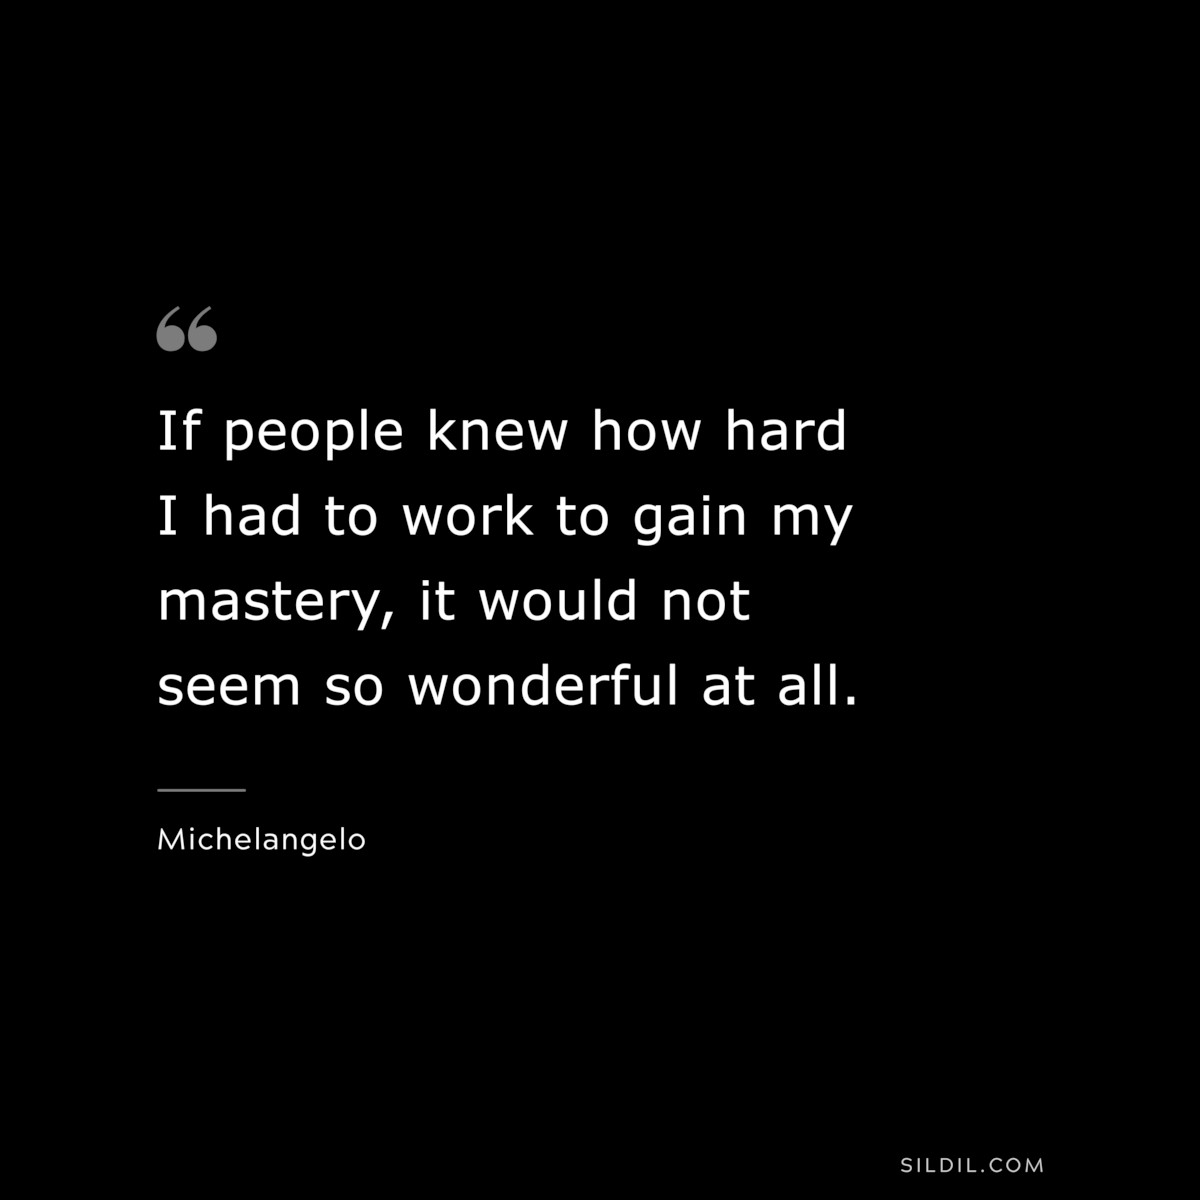 If people knew how hard I had to work to gain my mastery, it would not seem so wonderful at all. ― Michelangelo